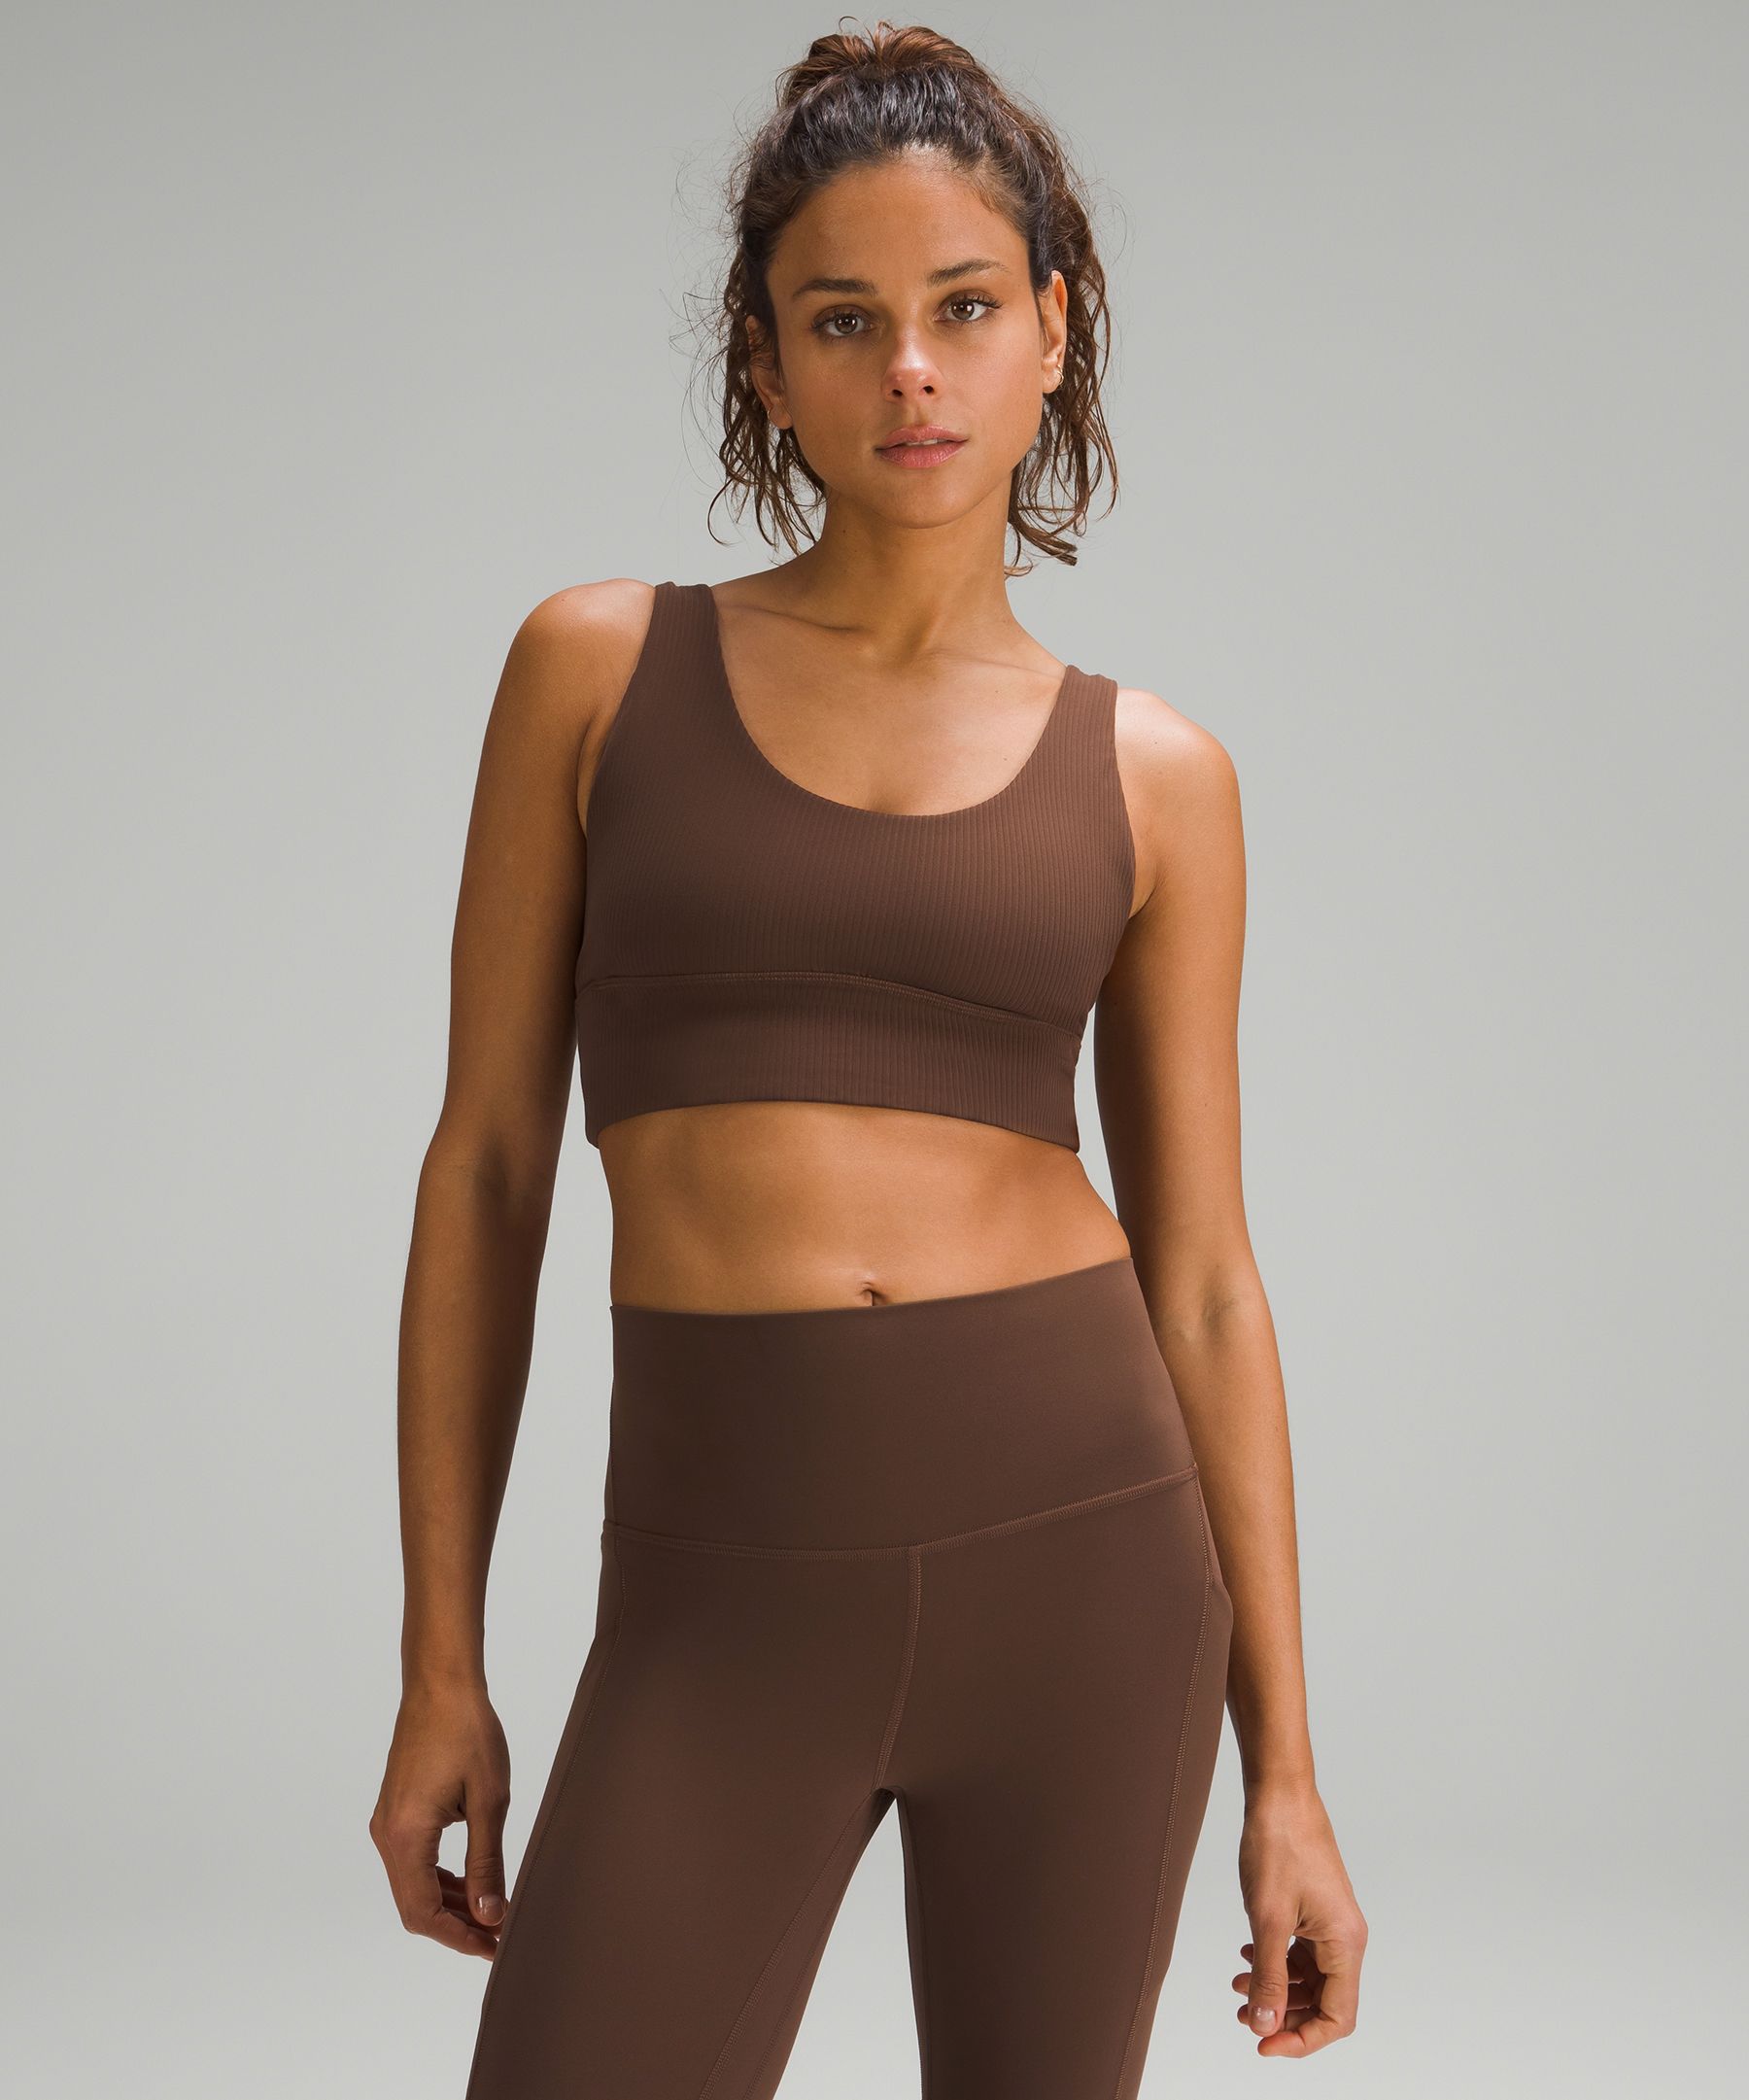 Lululemon Align Ribbed Bra A/B Cup, Light Support – The Shop at